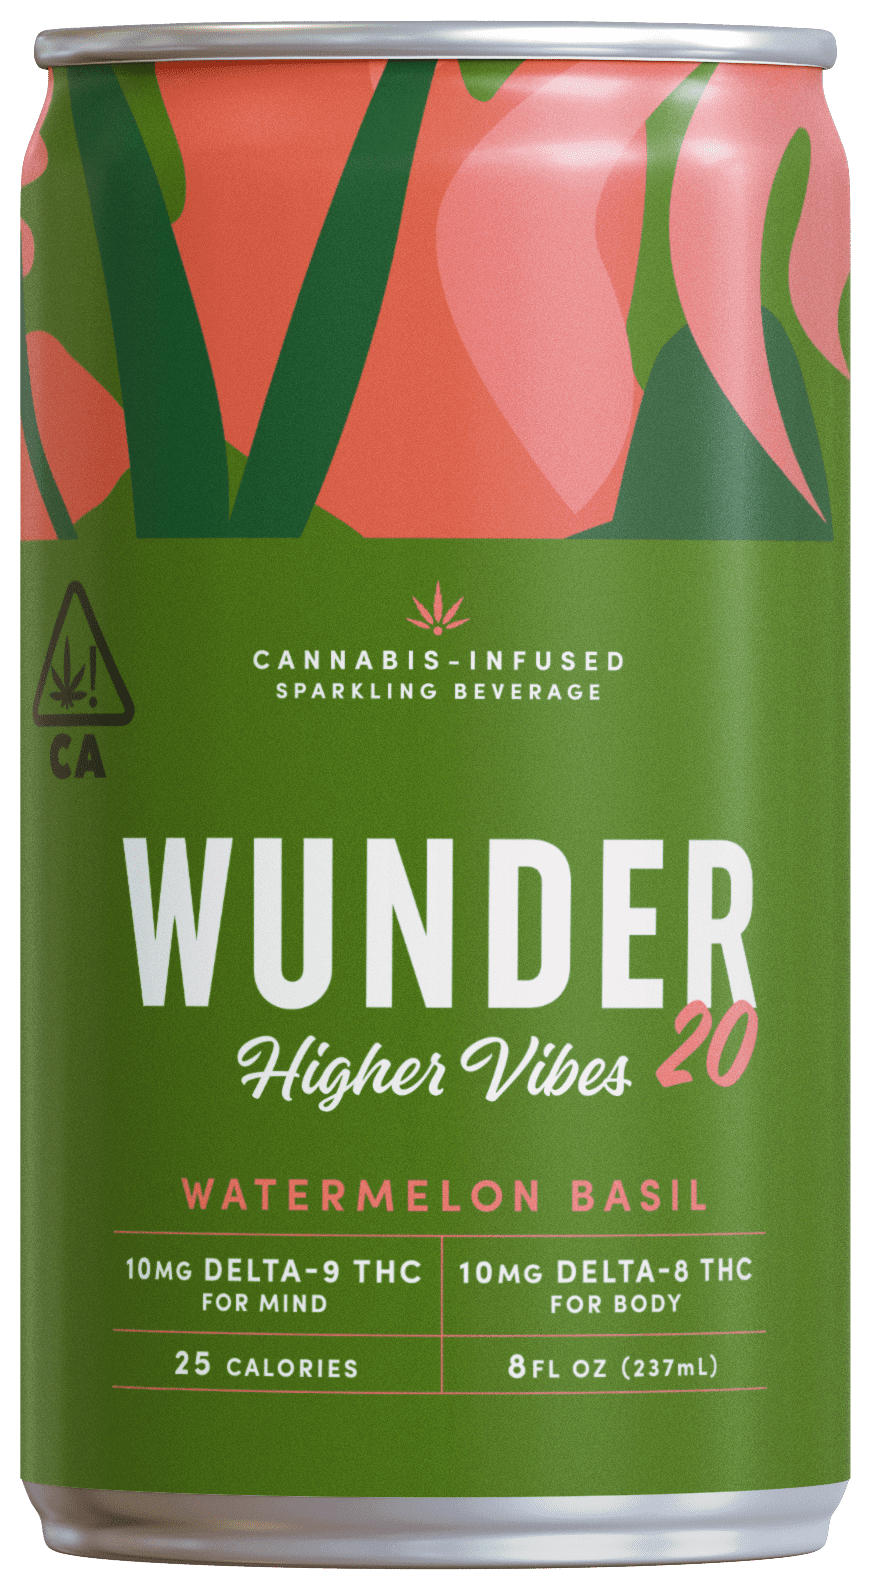 WUNDER Higher Vibes cannabis drink in watermelon basil flavor with 10mg of thc and 10mg of delta-8 thc